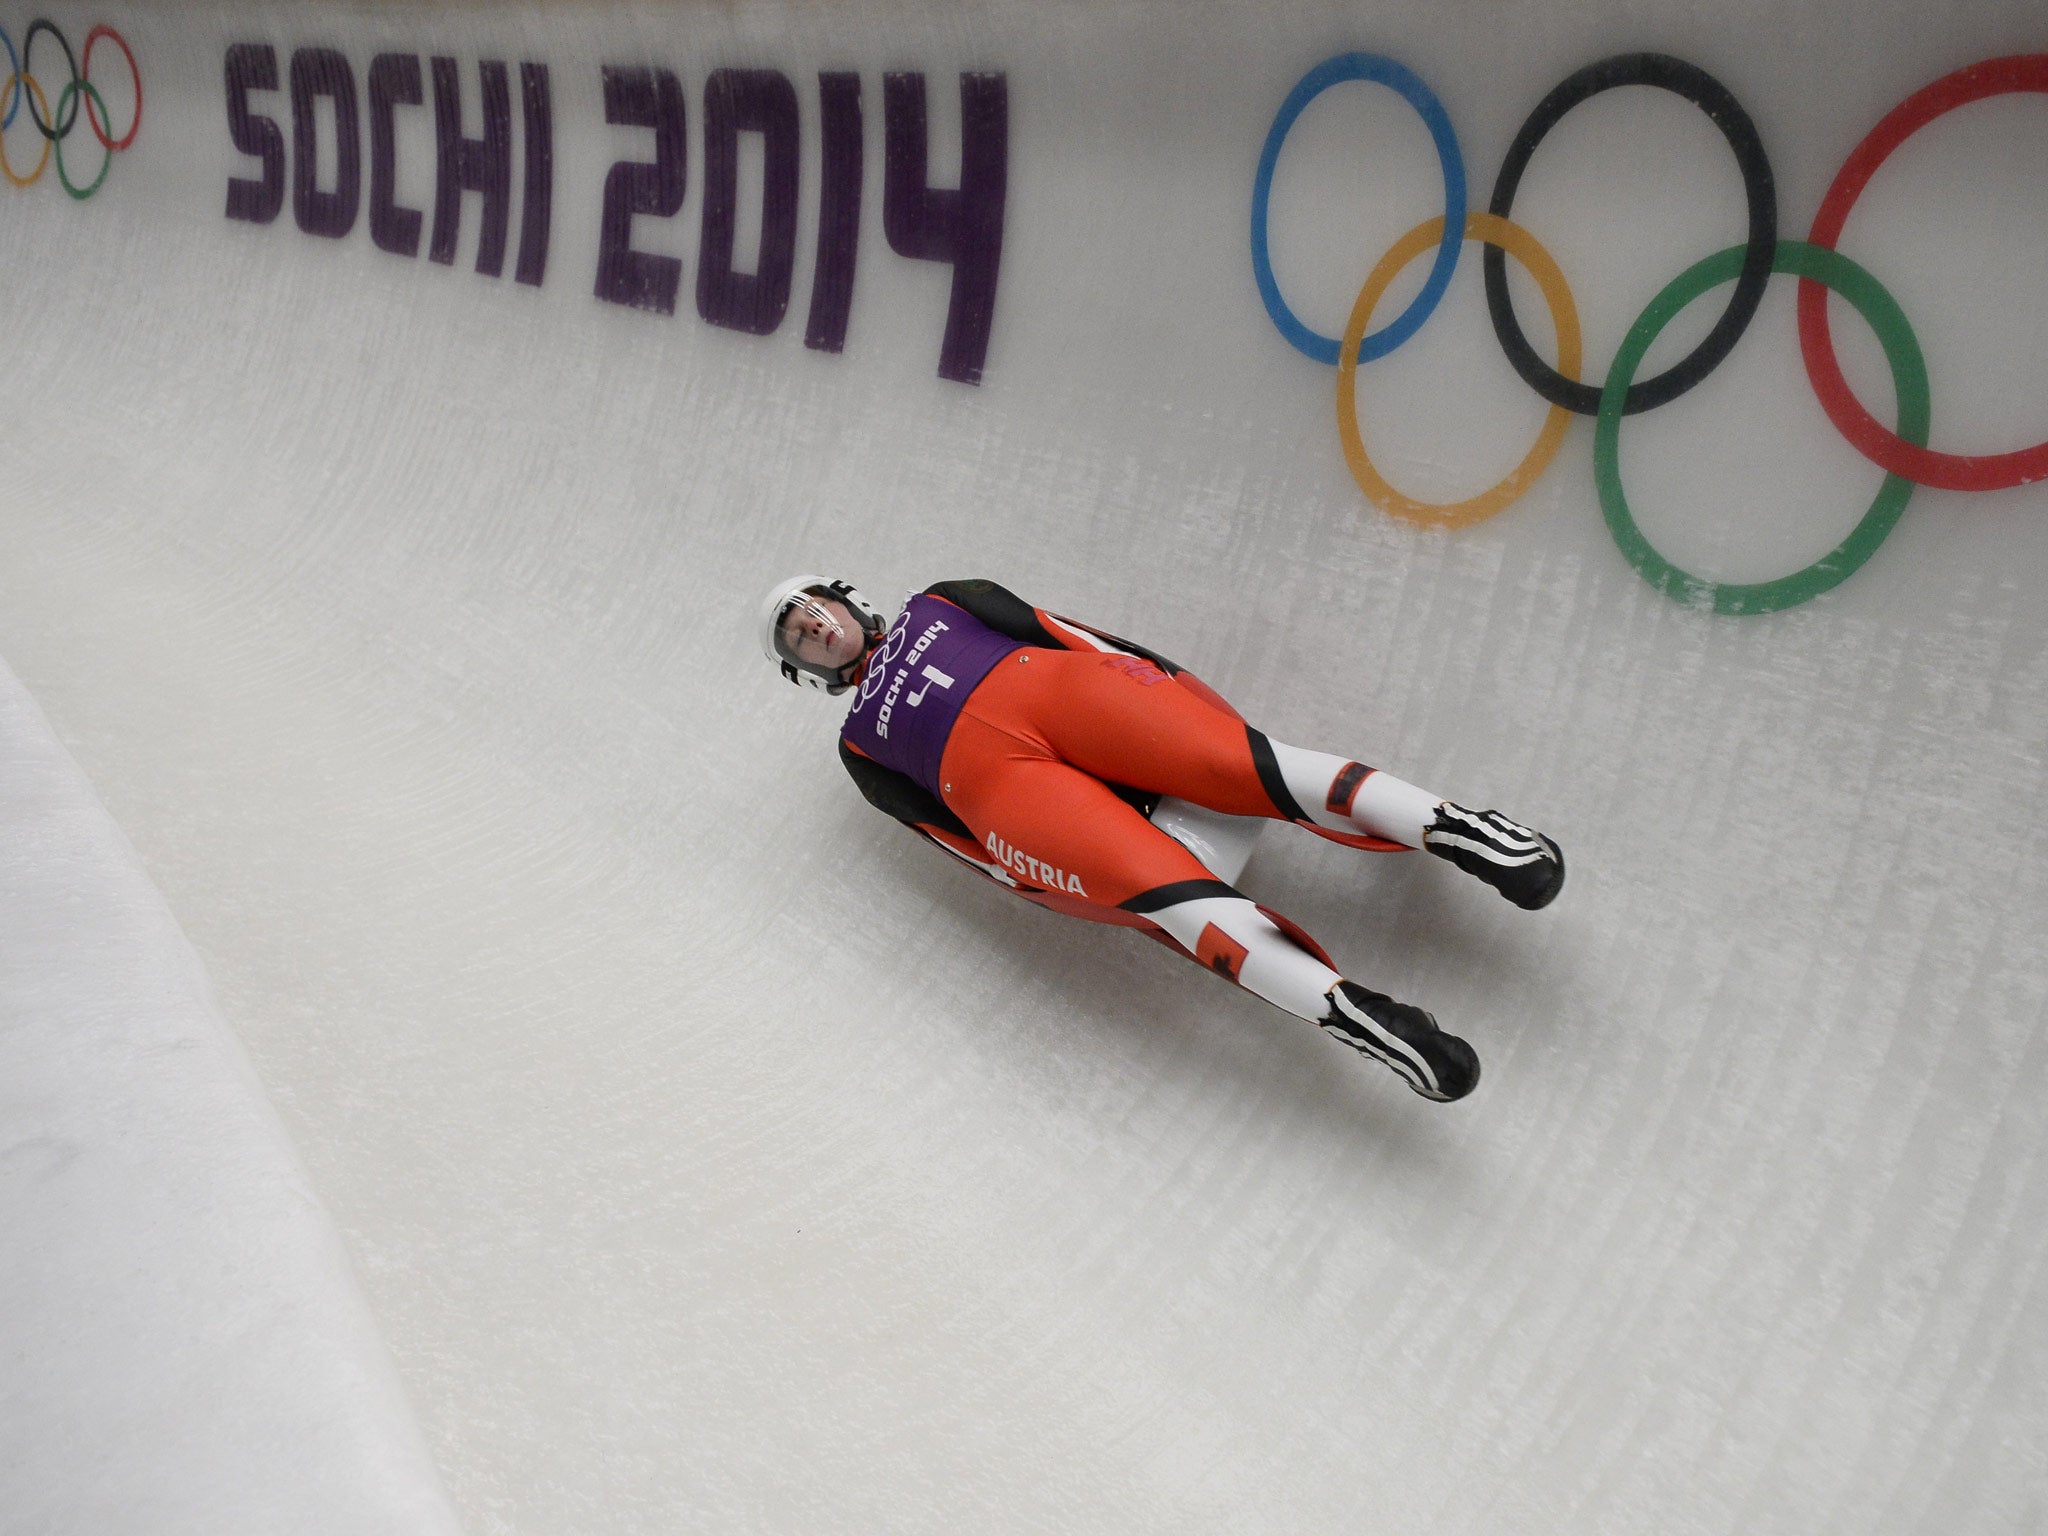 Austria's Miriam Kastlunger races during a women's Luge training session at the Sanki Sliding Centre in Rosa Khutor